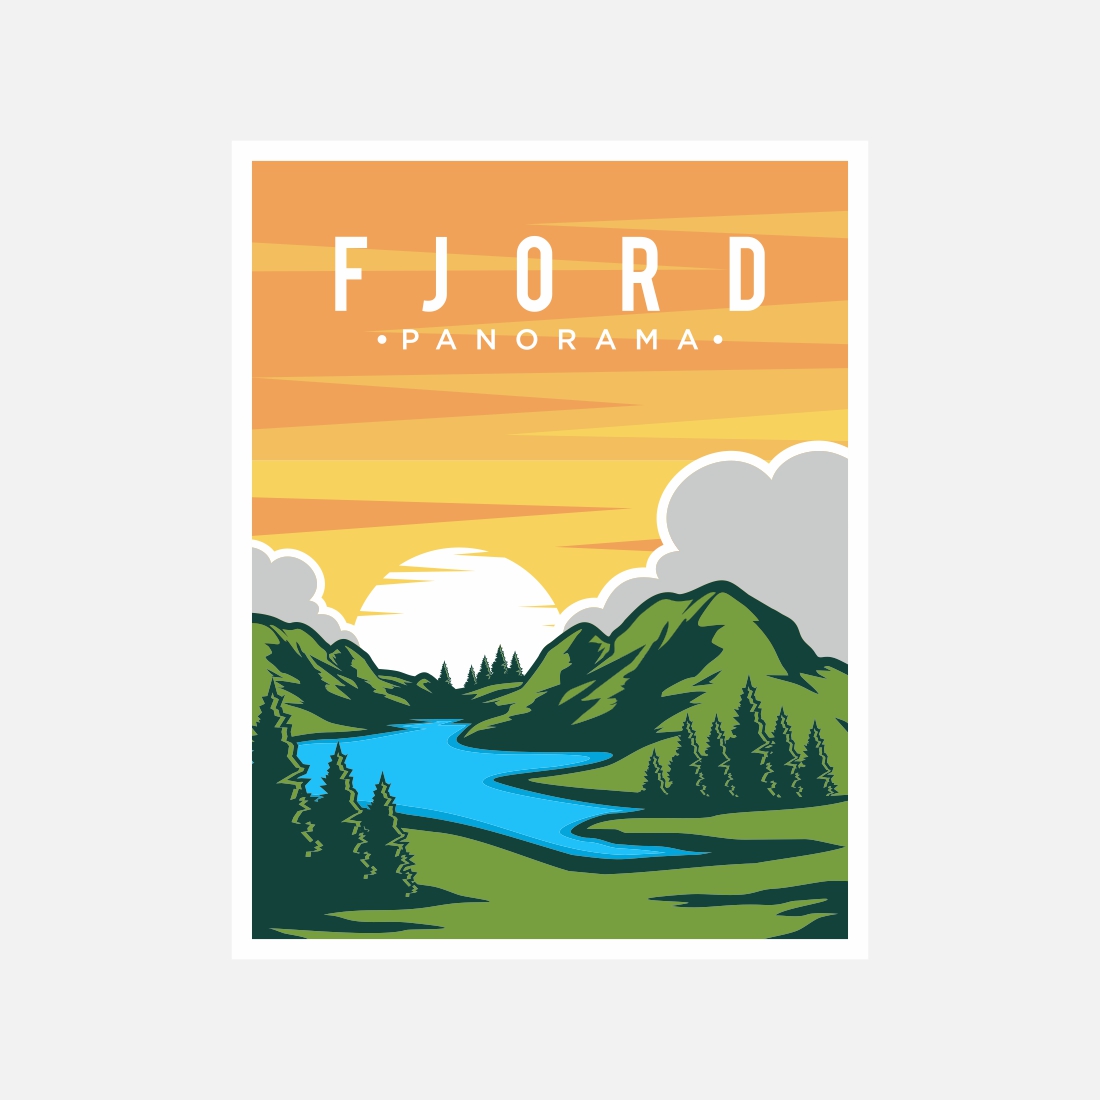 Fjord panorama poster vector illustration desig – Only $7 cover image.